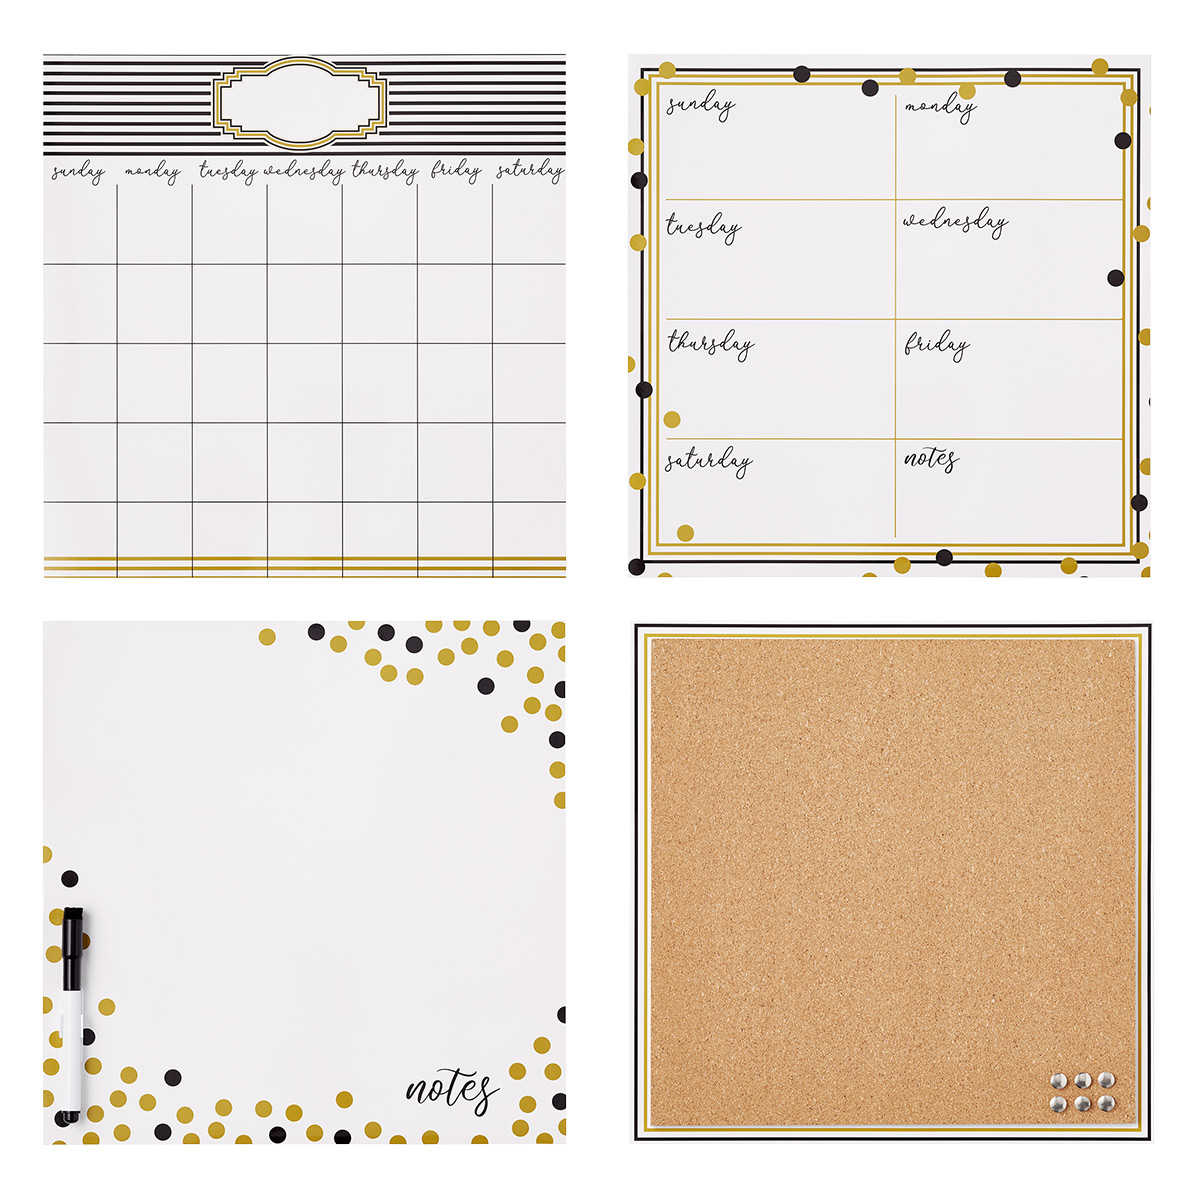 family command center dry erase board clear acrylic calendar office decor 03-009-065 Acrylic Daily Schedule Board For Wall